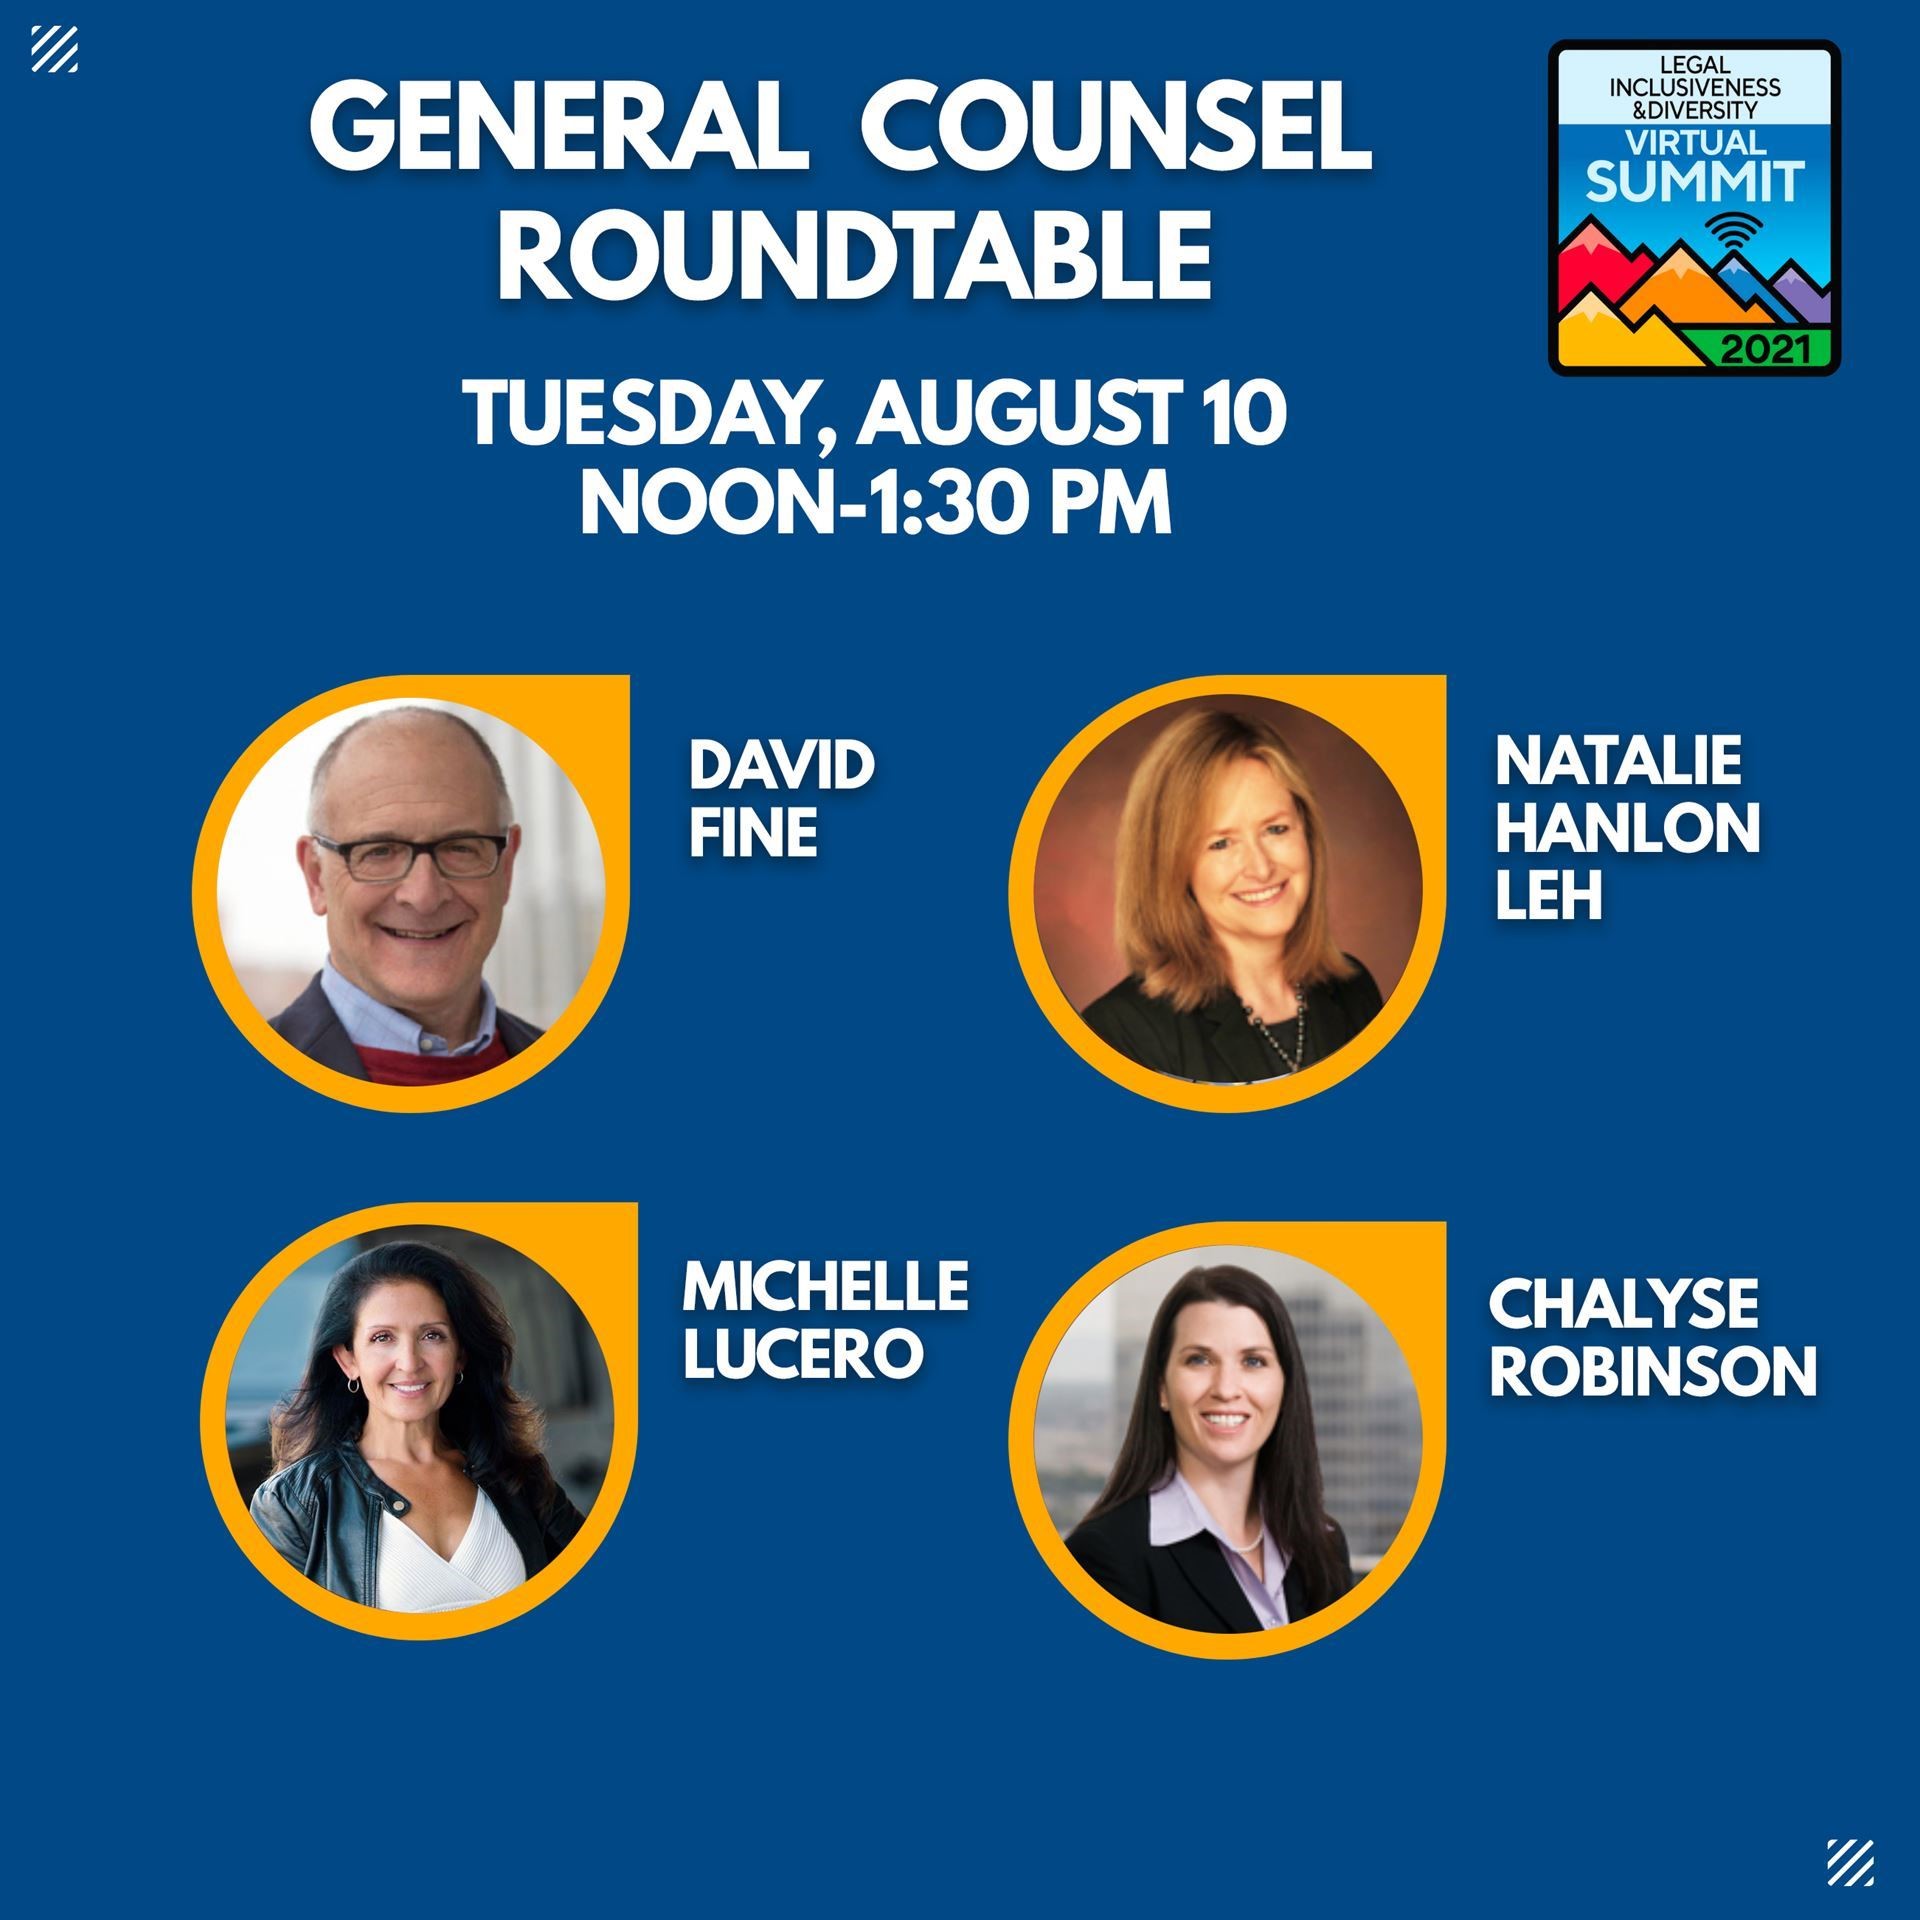 Diversity Summit 2021 – General Counsel Round Table